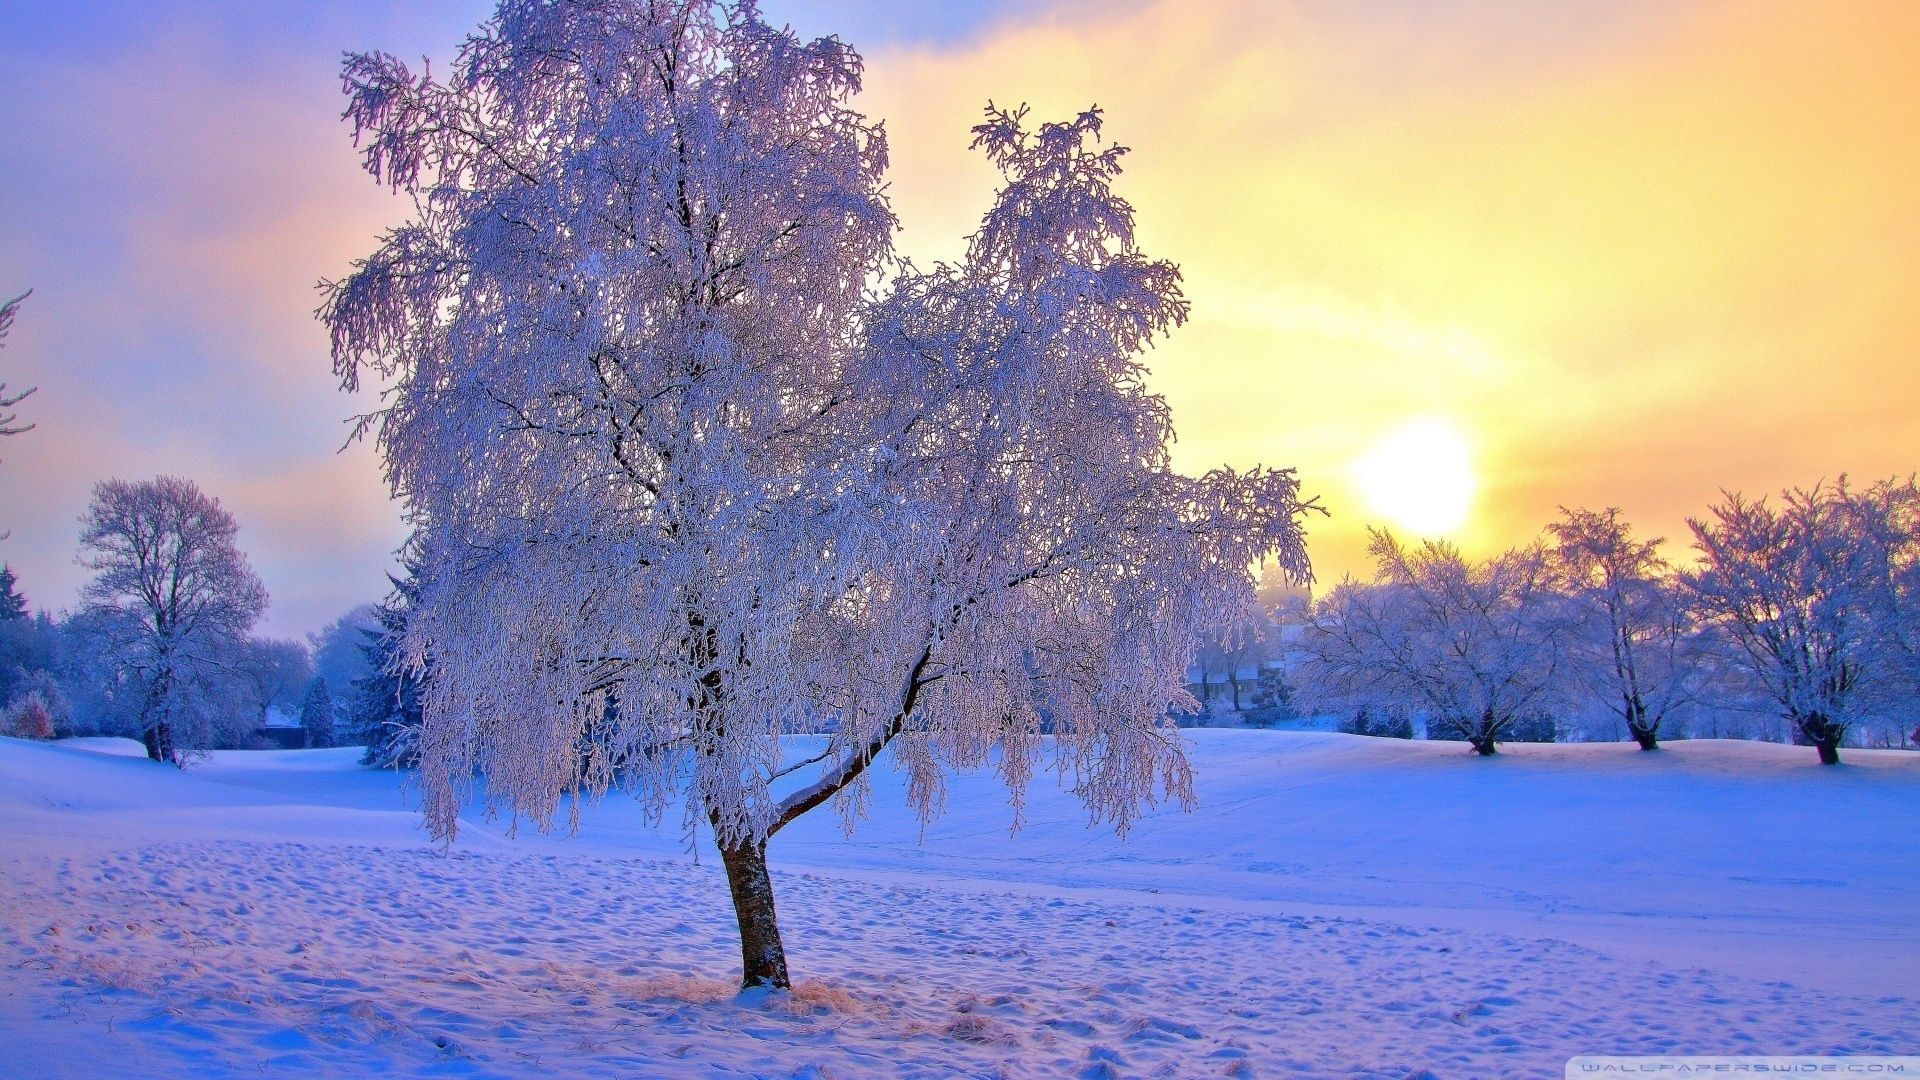 Because winter somehow marks the start of the holiday season, beautiful winter wallpaper and amazing winter sc. Winter wallpaper, Winter landscape, Winter sunset